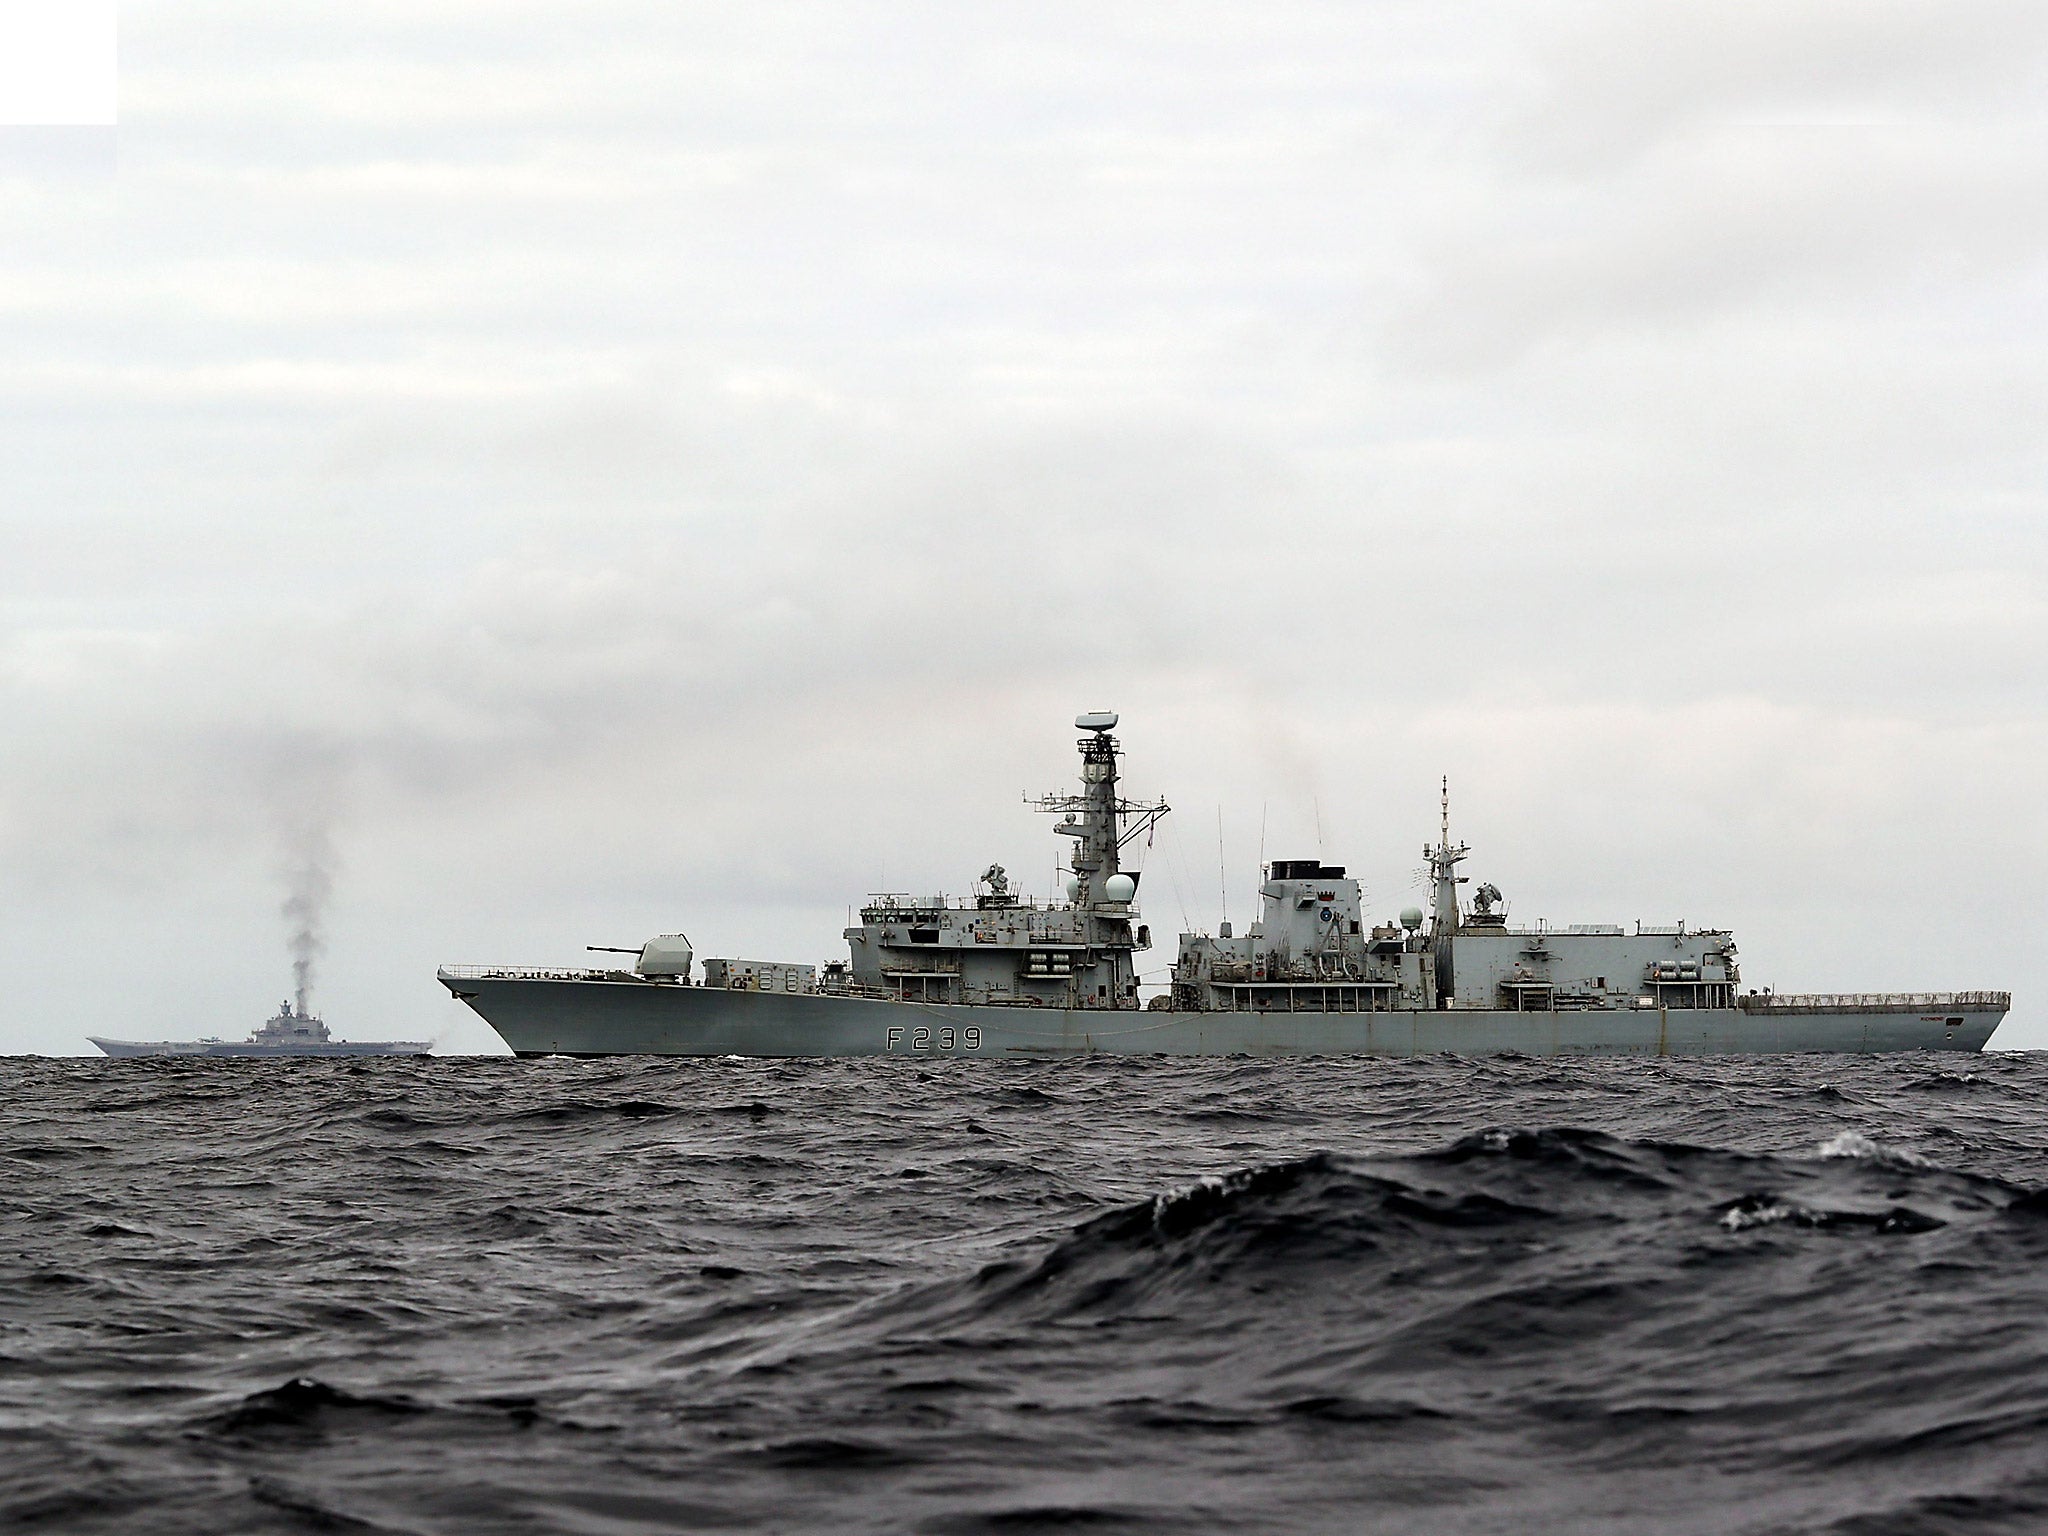 HMS Richmond (front), a Type 23 Duke Class frigate, observing aircraft carrier, which is part of a Russian task group, during transit through the North Sea